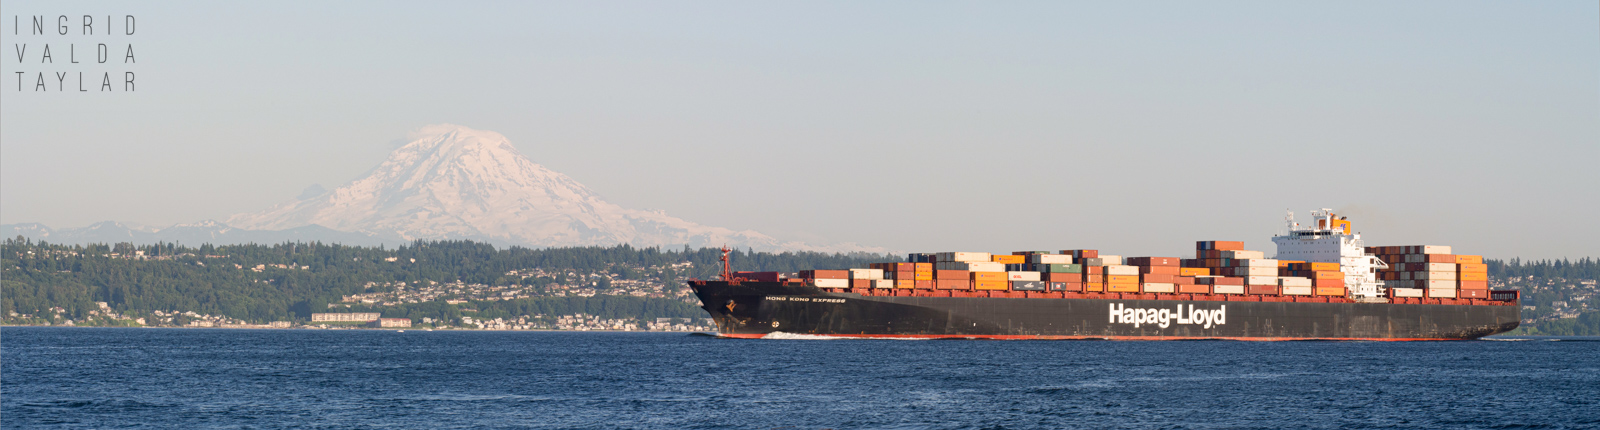 Stitched Panorama of Mt. Rainier and Container Ship